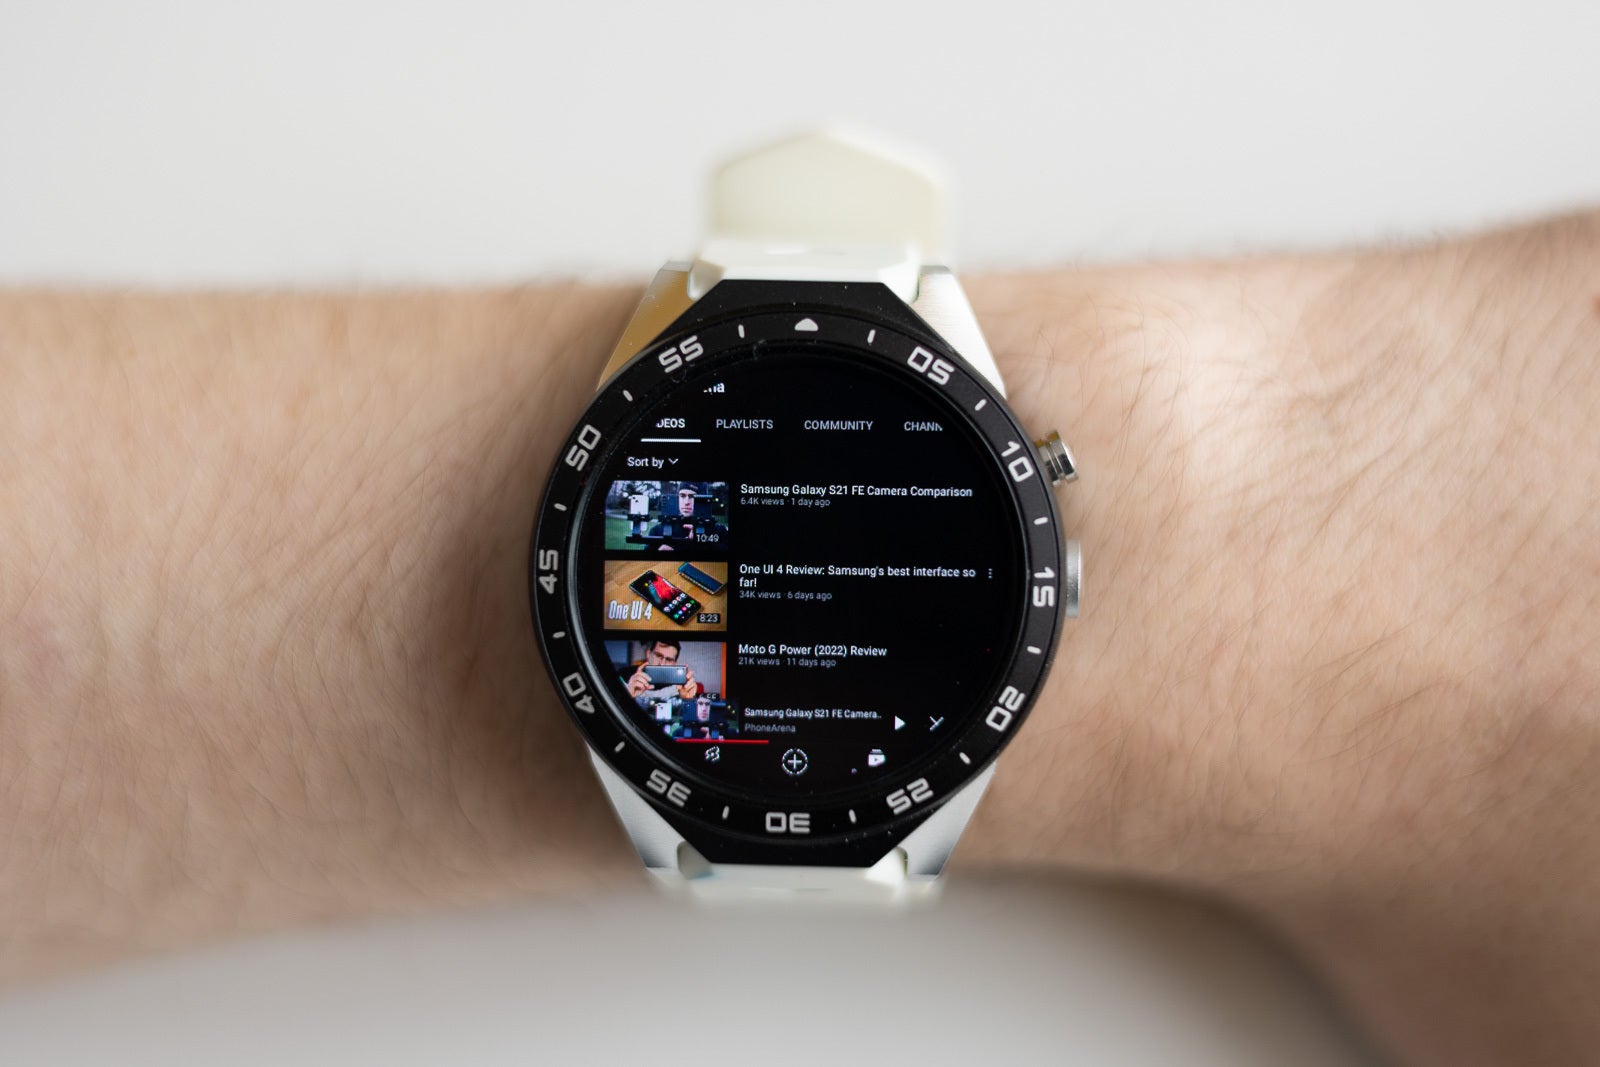 YouTube Wasn't Made For Round Screens Like Any Other Android App - Full Android On Smartwatch: Ridiculous Or Terrible?